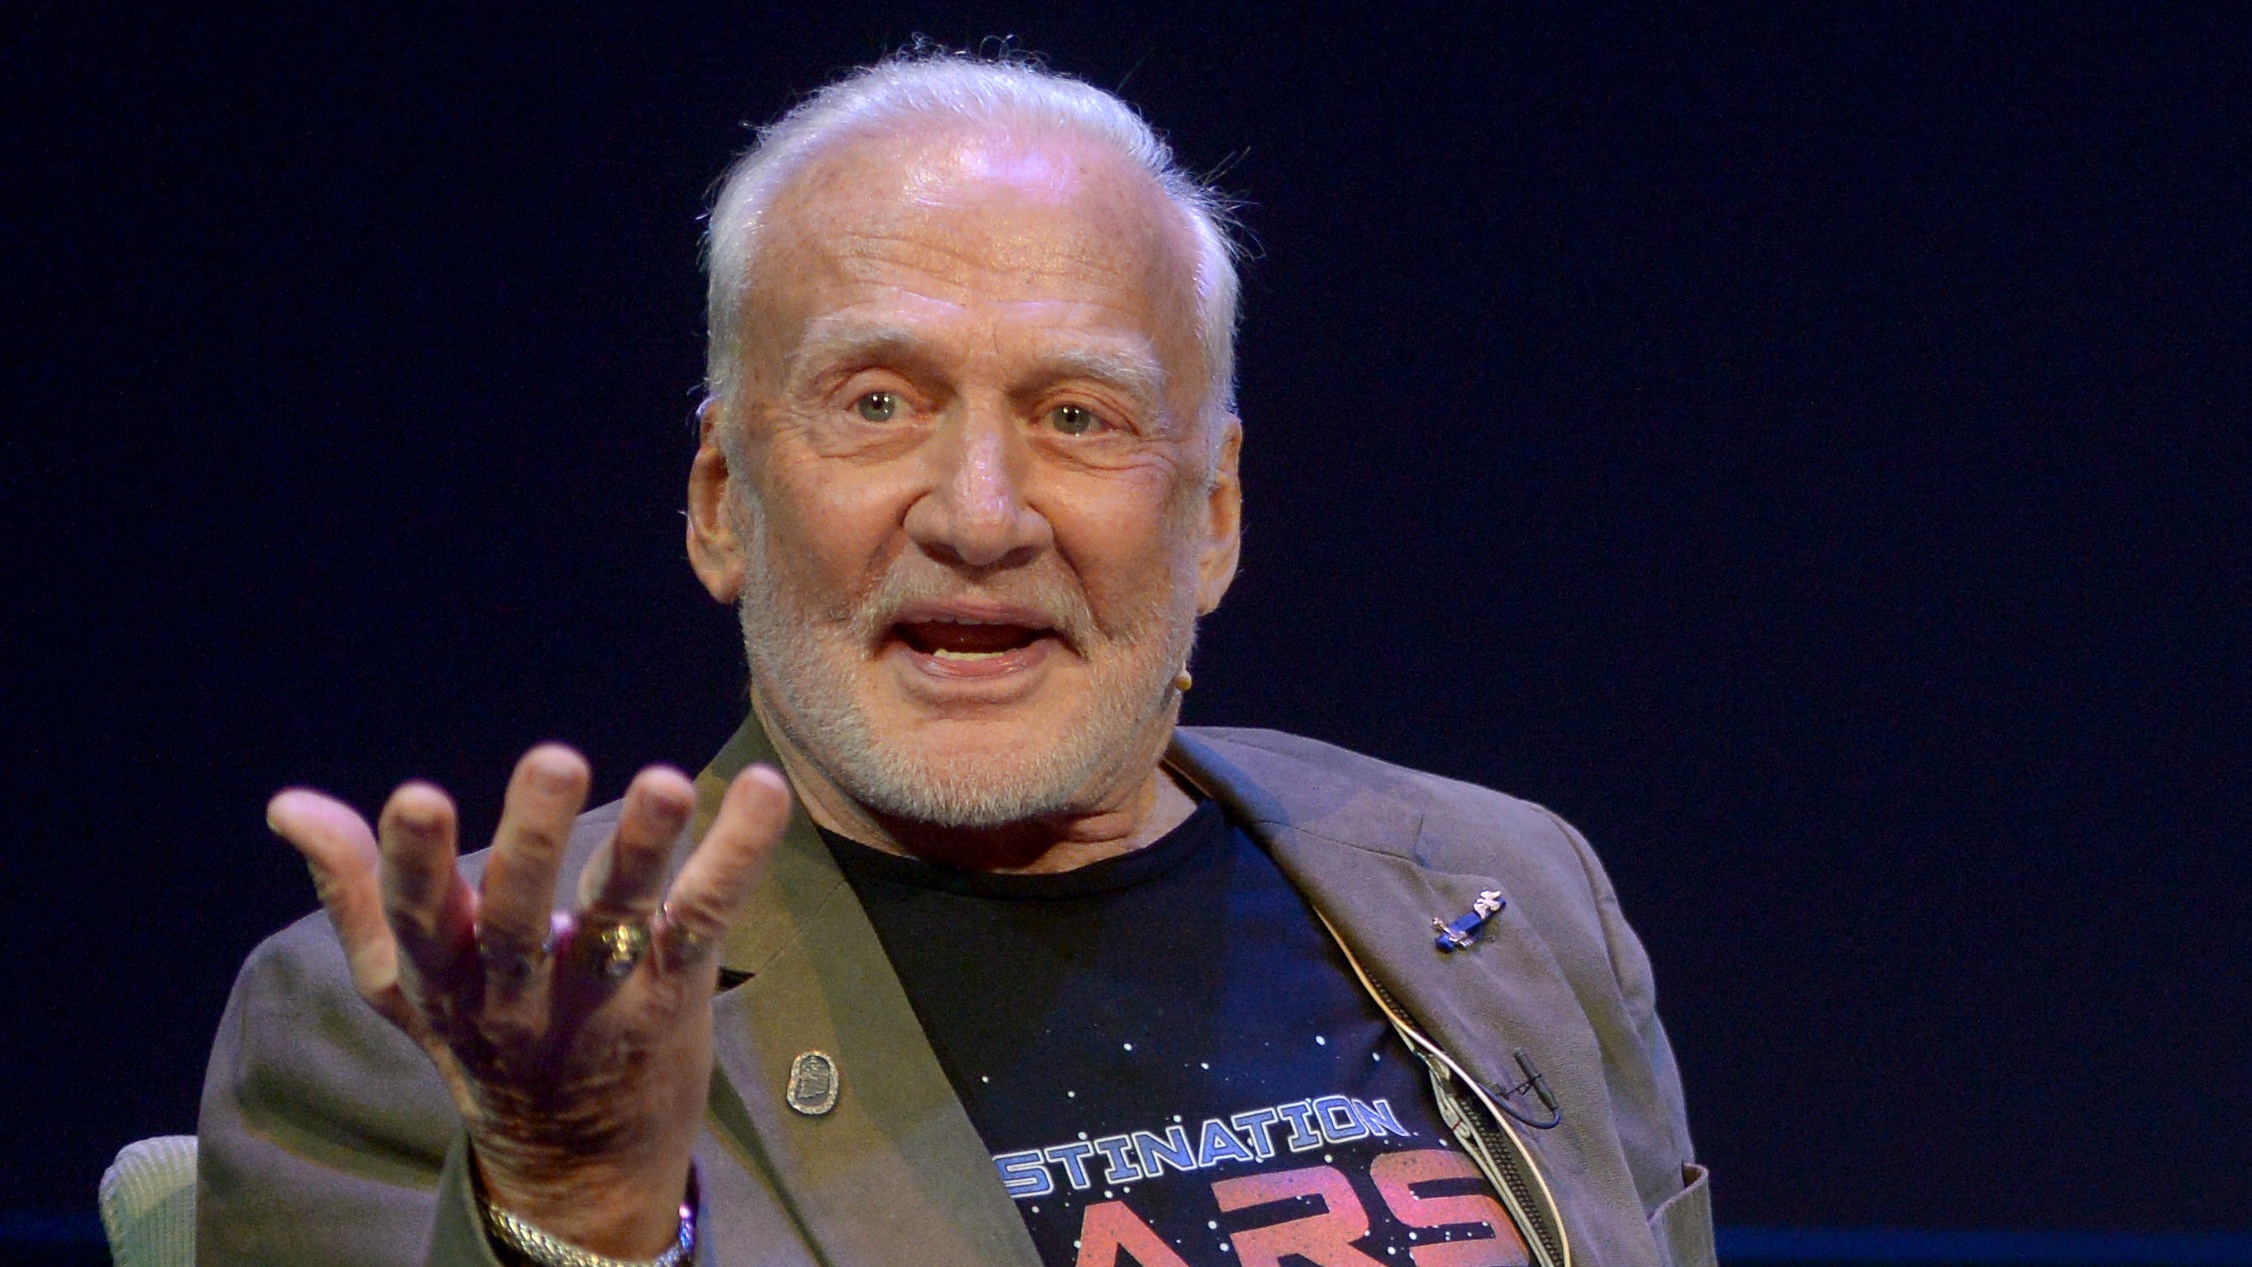 Buzz Aldrin wants to serve as a 'strong adviser' in US mission to reach Mars